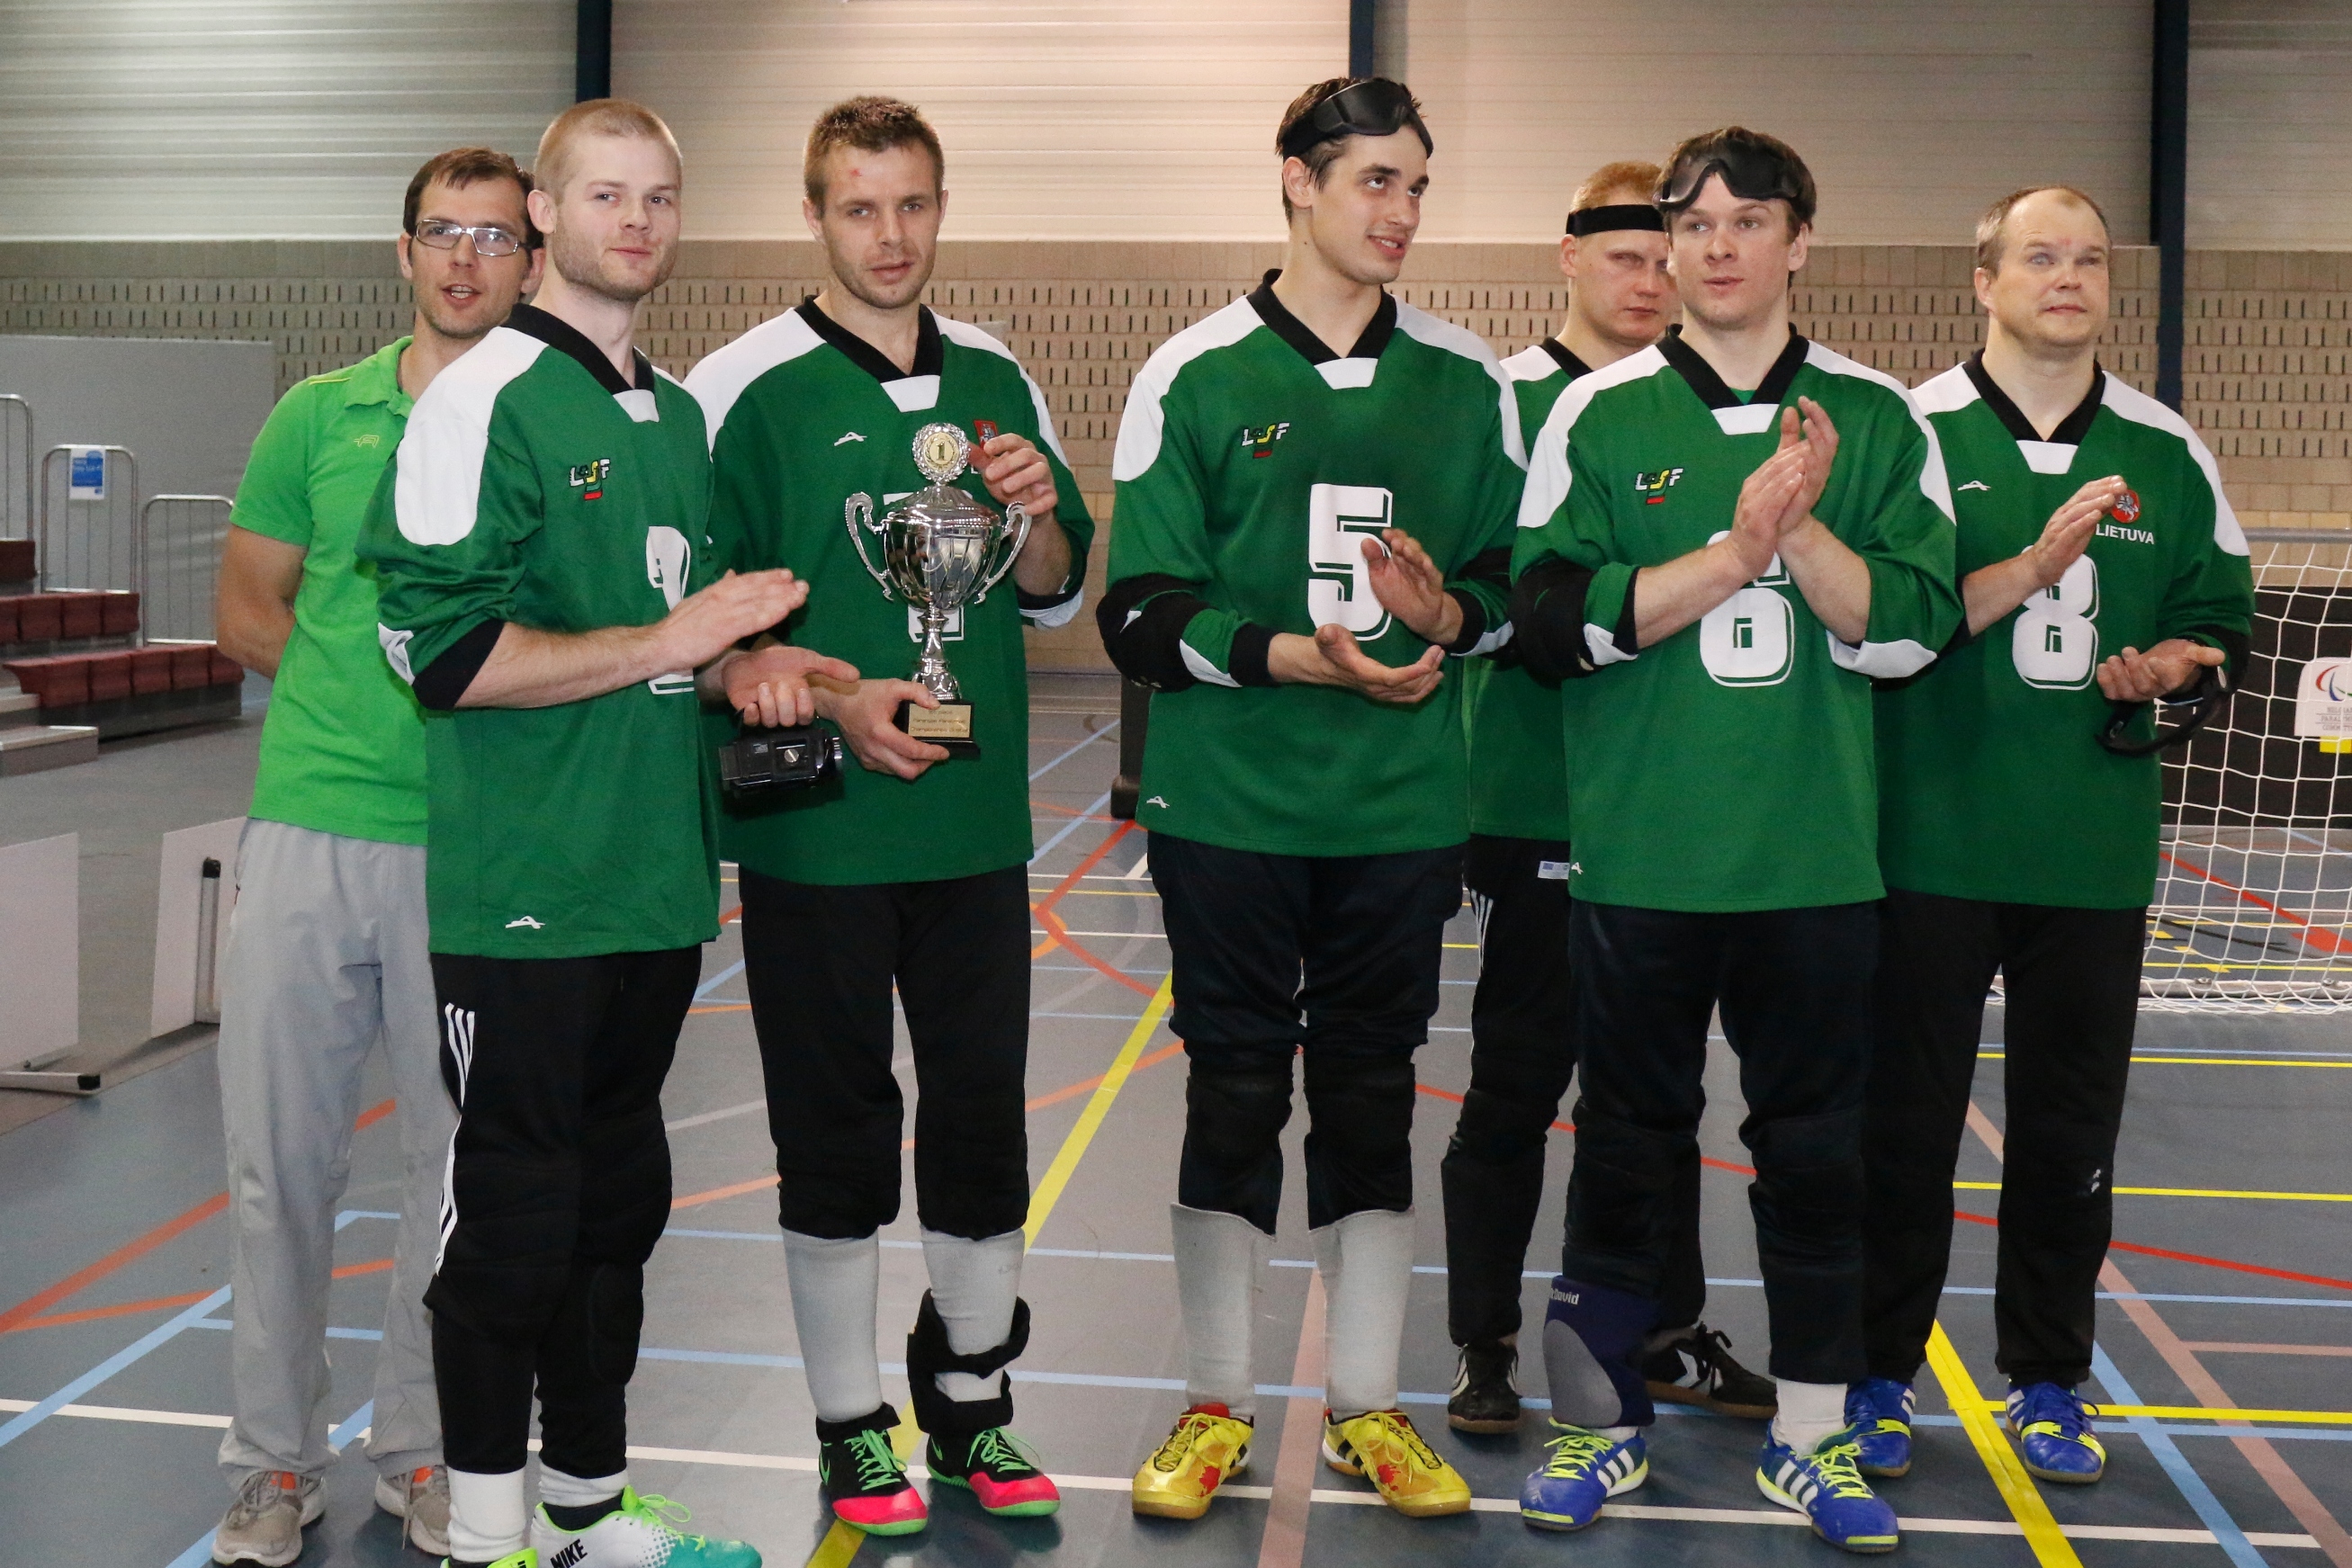 A goalball team faces the camera with their tournament trophy.